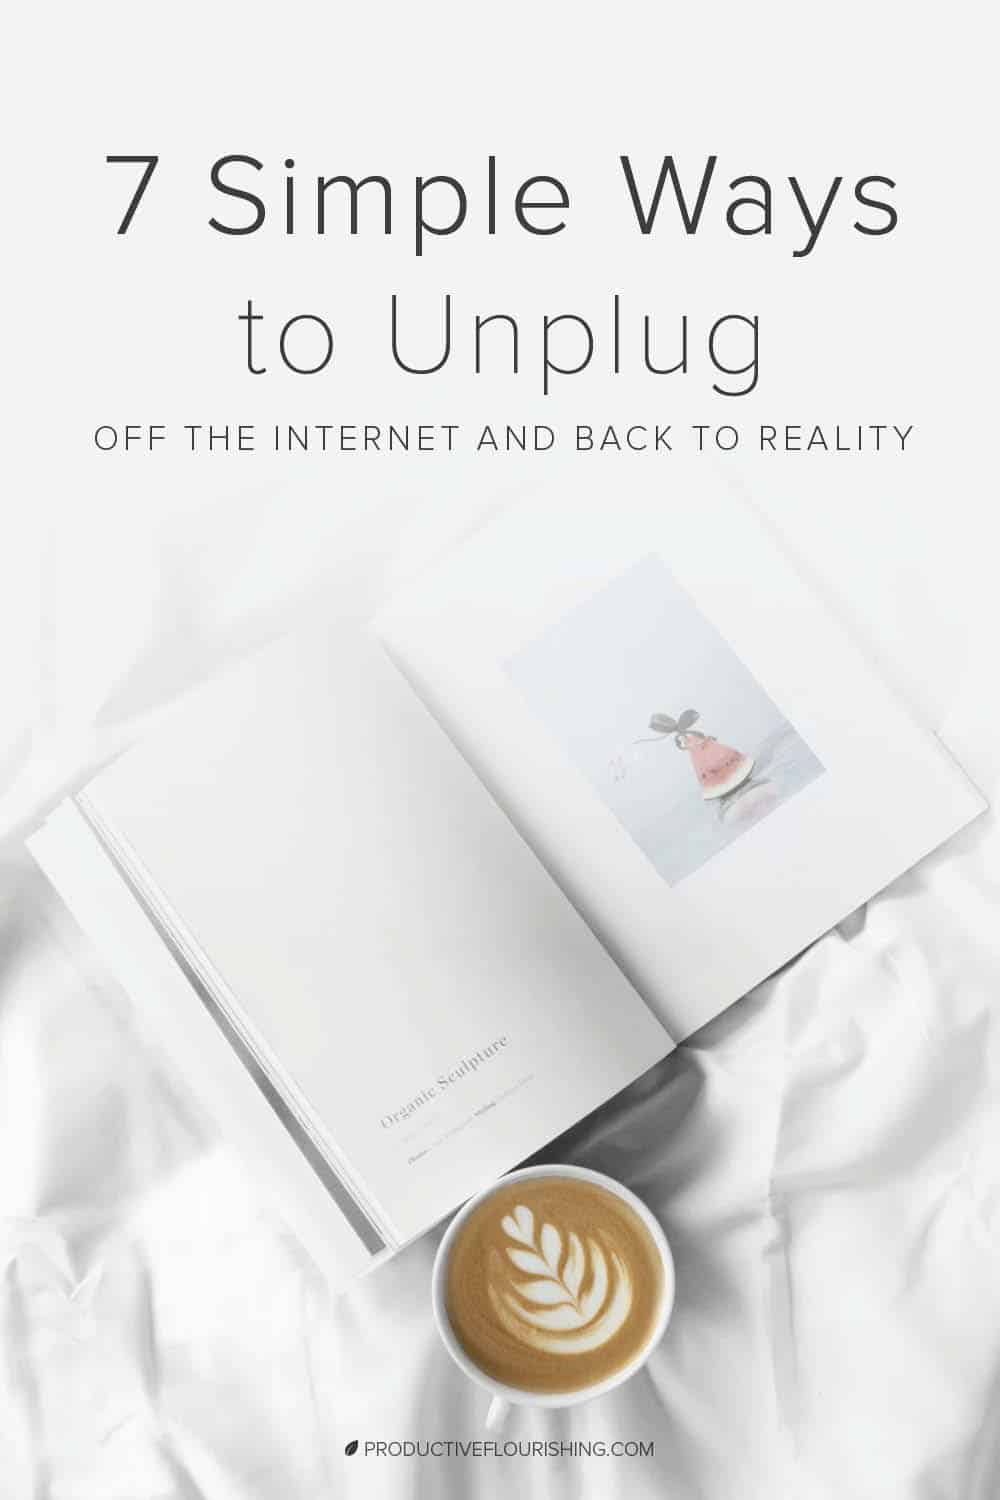 How to unplug from the Internet and get back to reality. Ideas and simple ways to take time off the Internet as a small business owner and entrepreneur. #productivity #selfcare #productiveflourishing